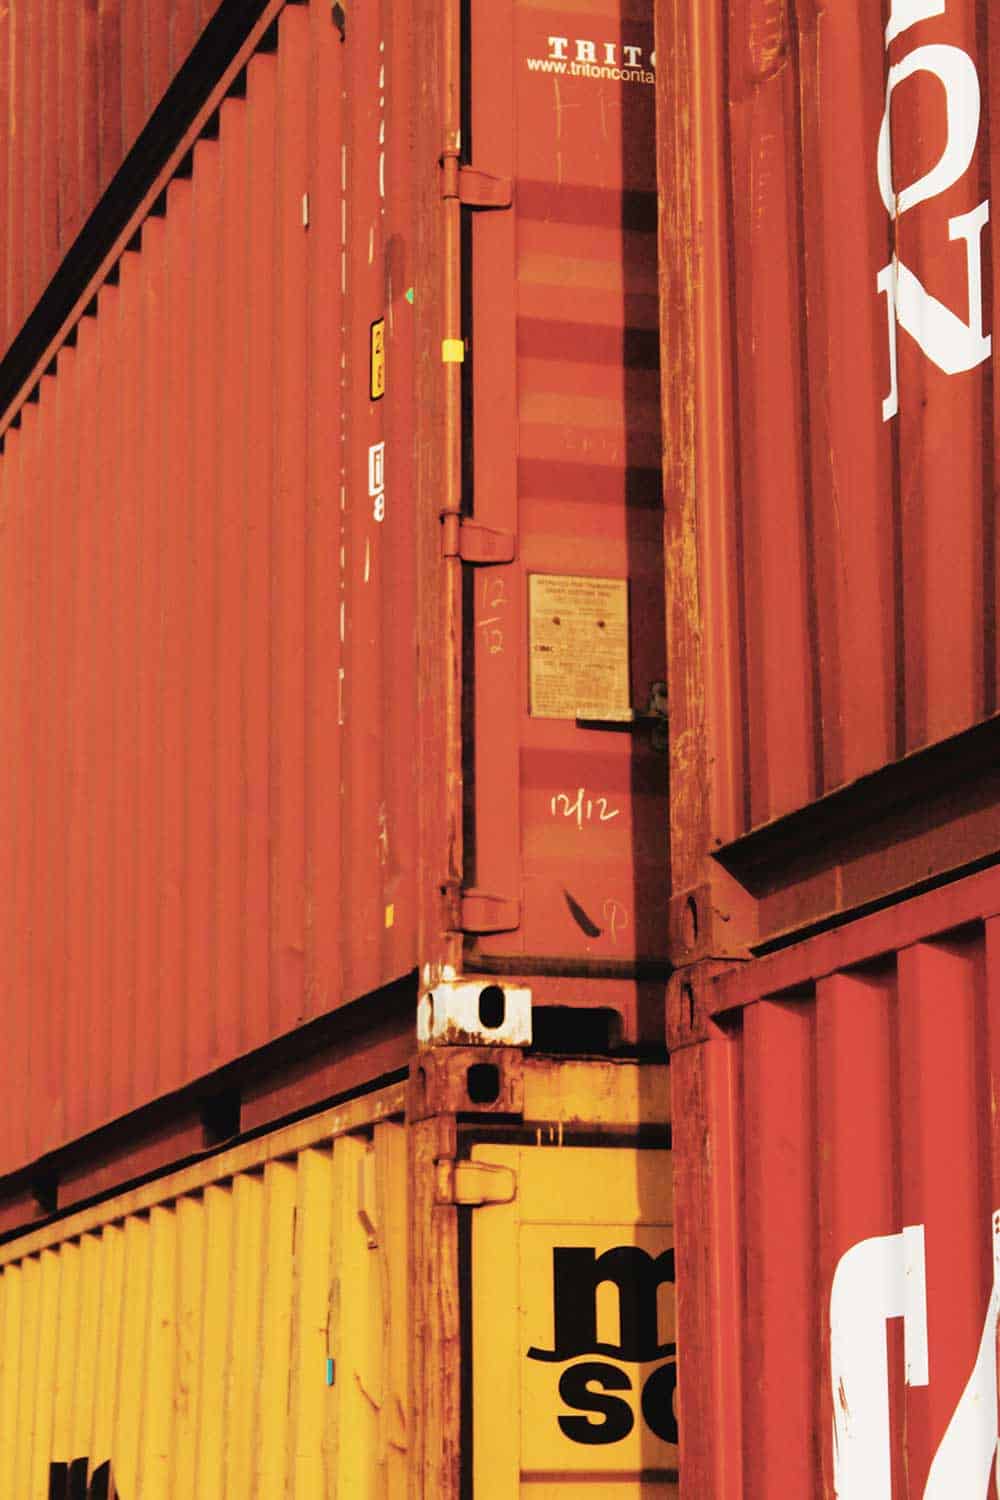 Close-up image of containers